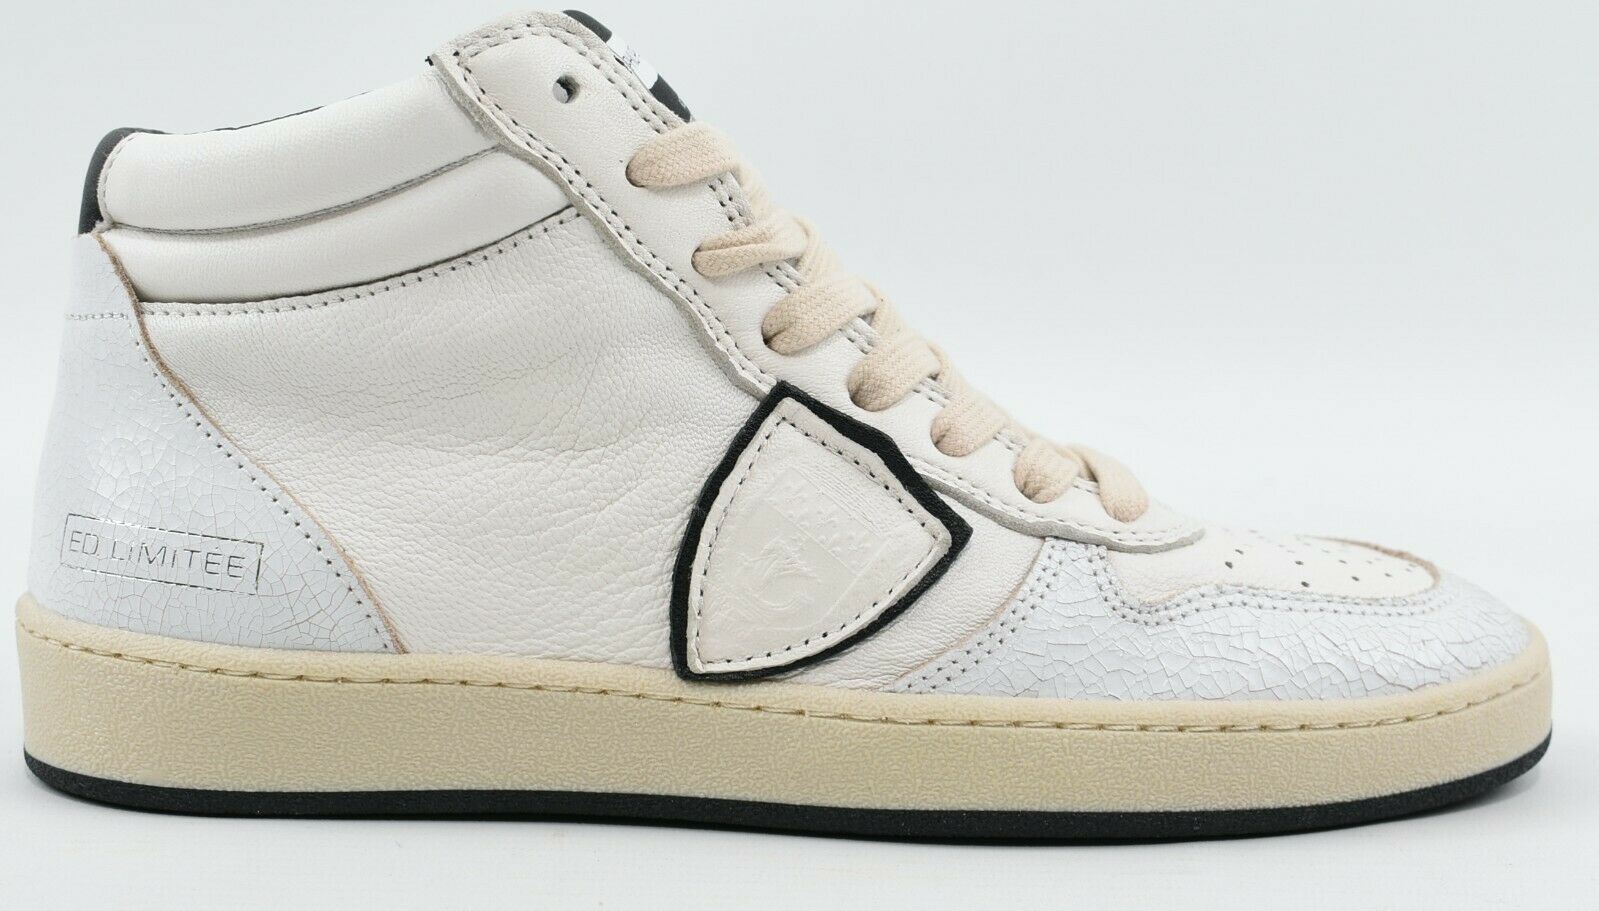 PHILIPPE MODEL Women's Mid Top White Leather Trainers, size UK 3 / EU 36